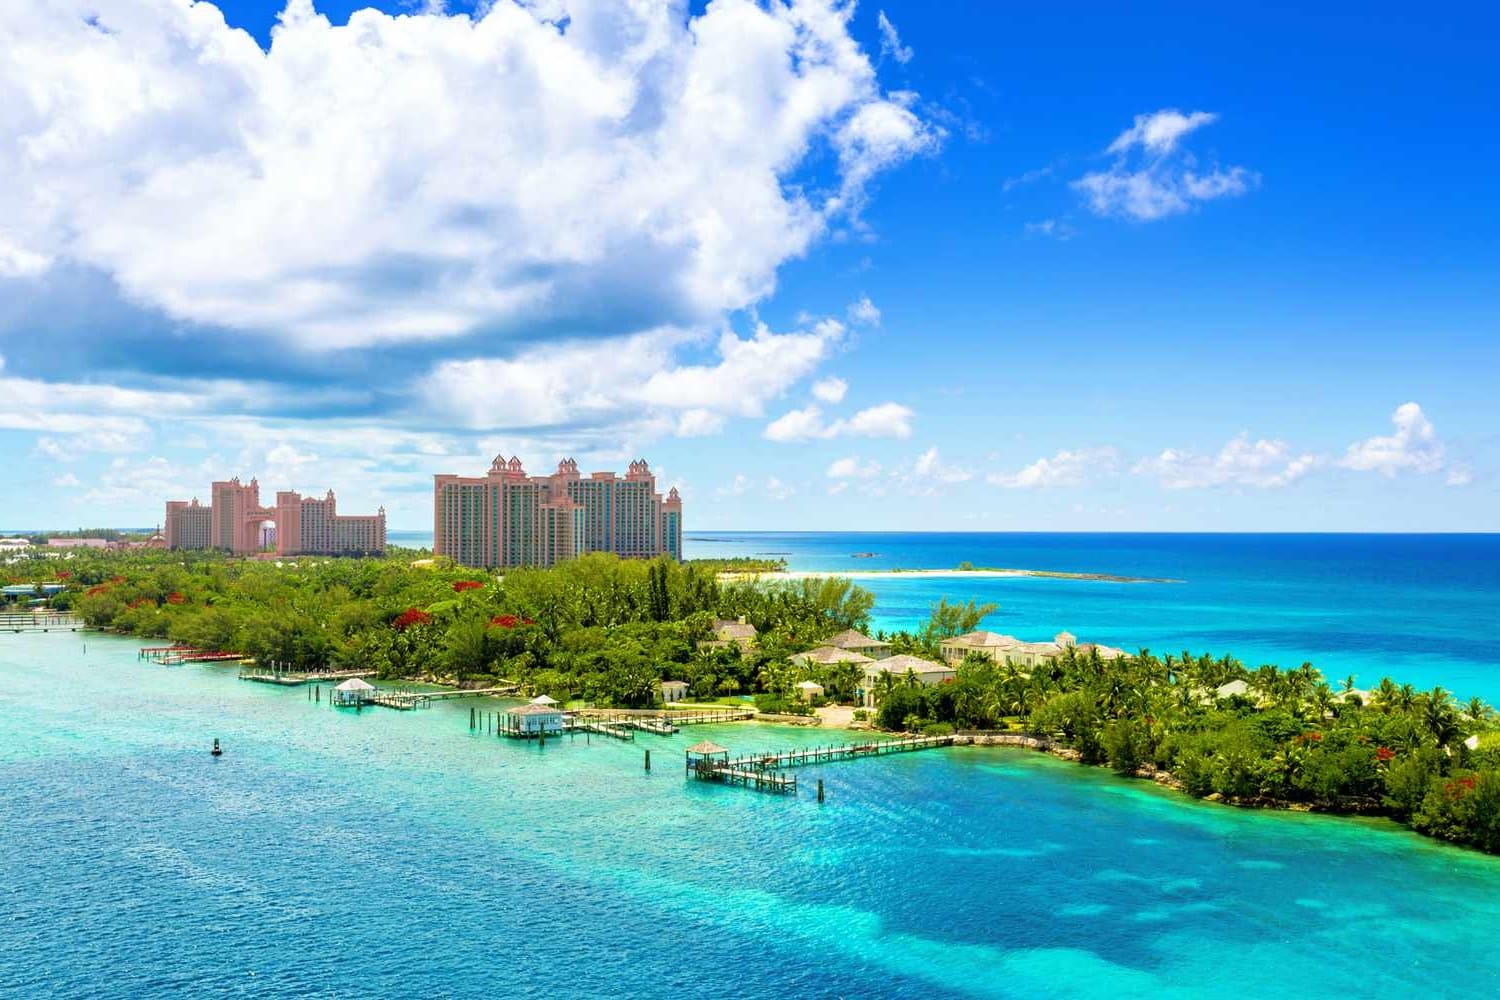 Bahamas Monthly Temperature Guide: What to Expect